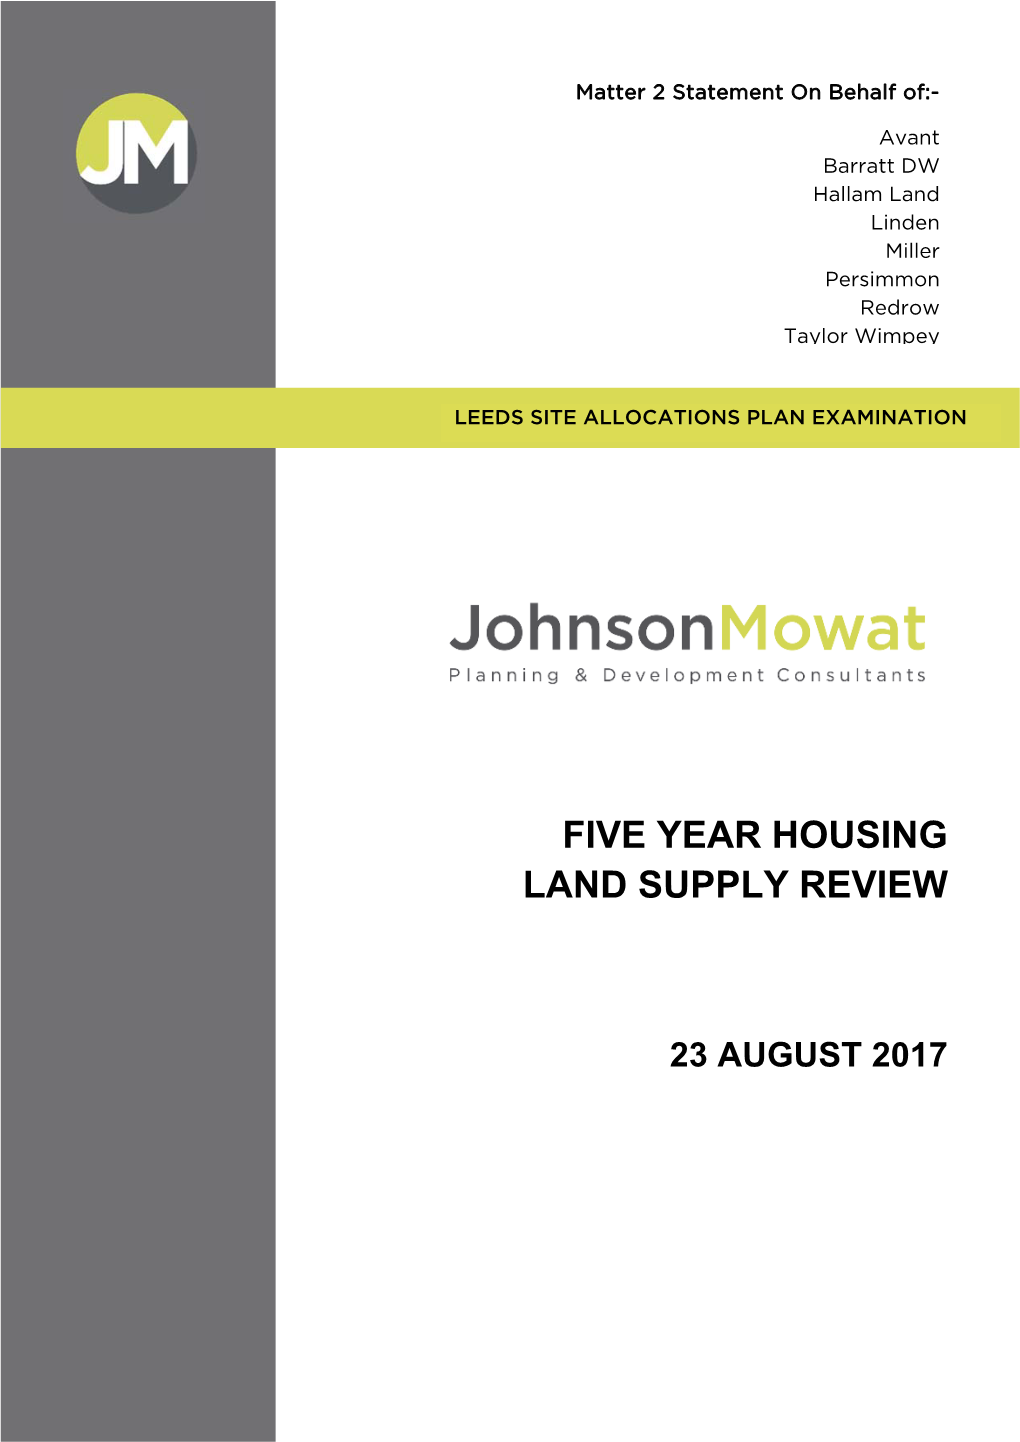 Five Year Housing Land Supply Review